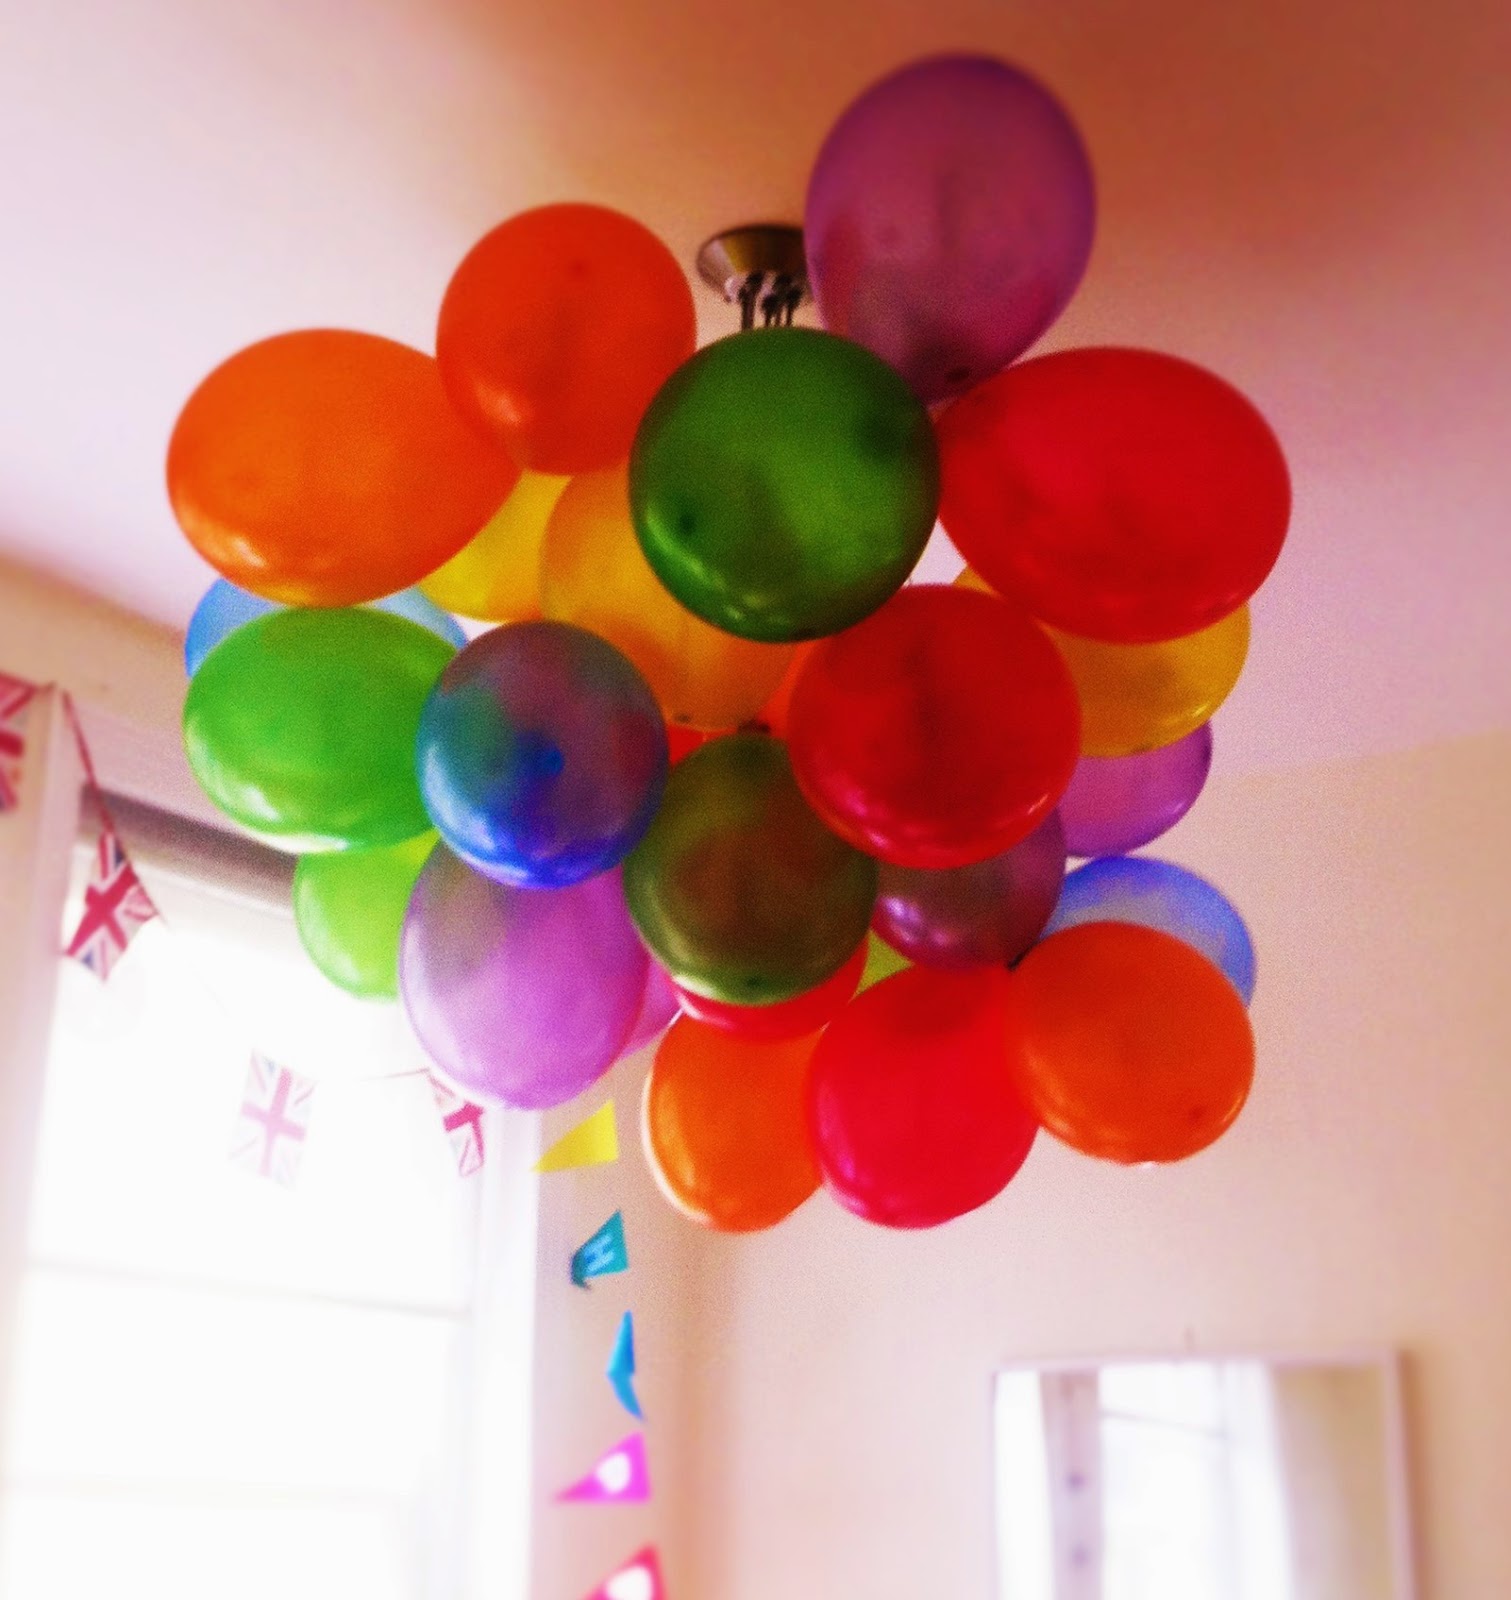 Anna Louise at Home: DIY Rainbow Party Ideas (for grown ups!)